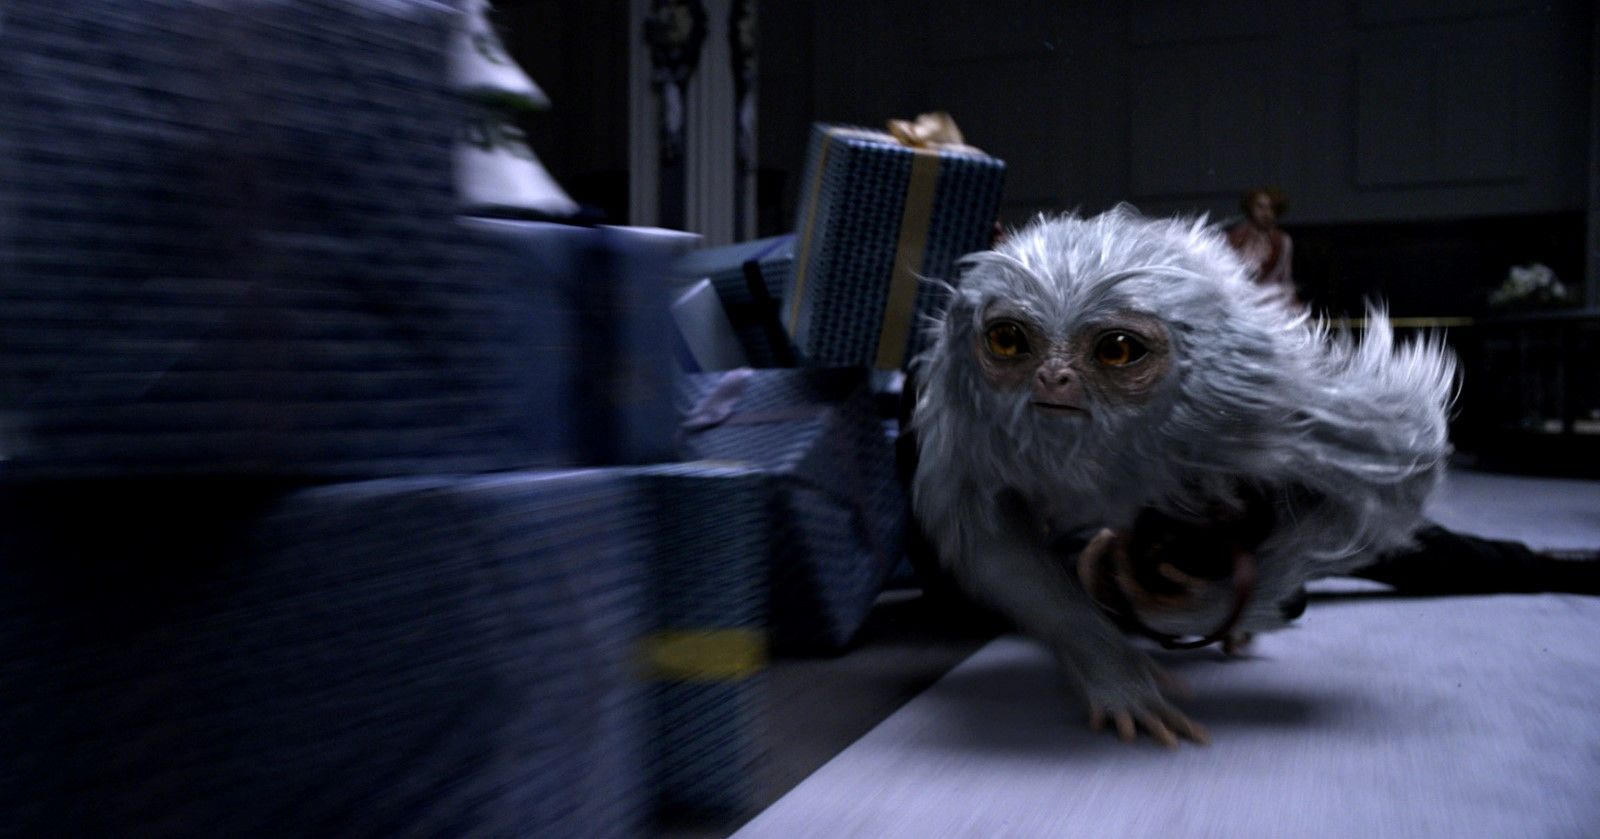 Fantastic Beasts and Where to Find Them Swooping Evil Photo